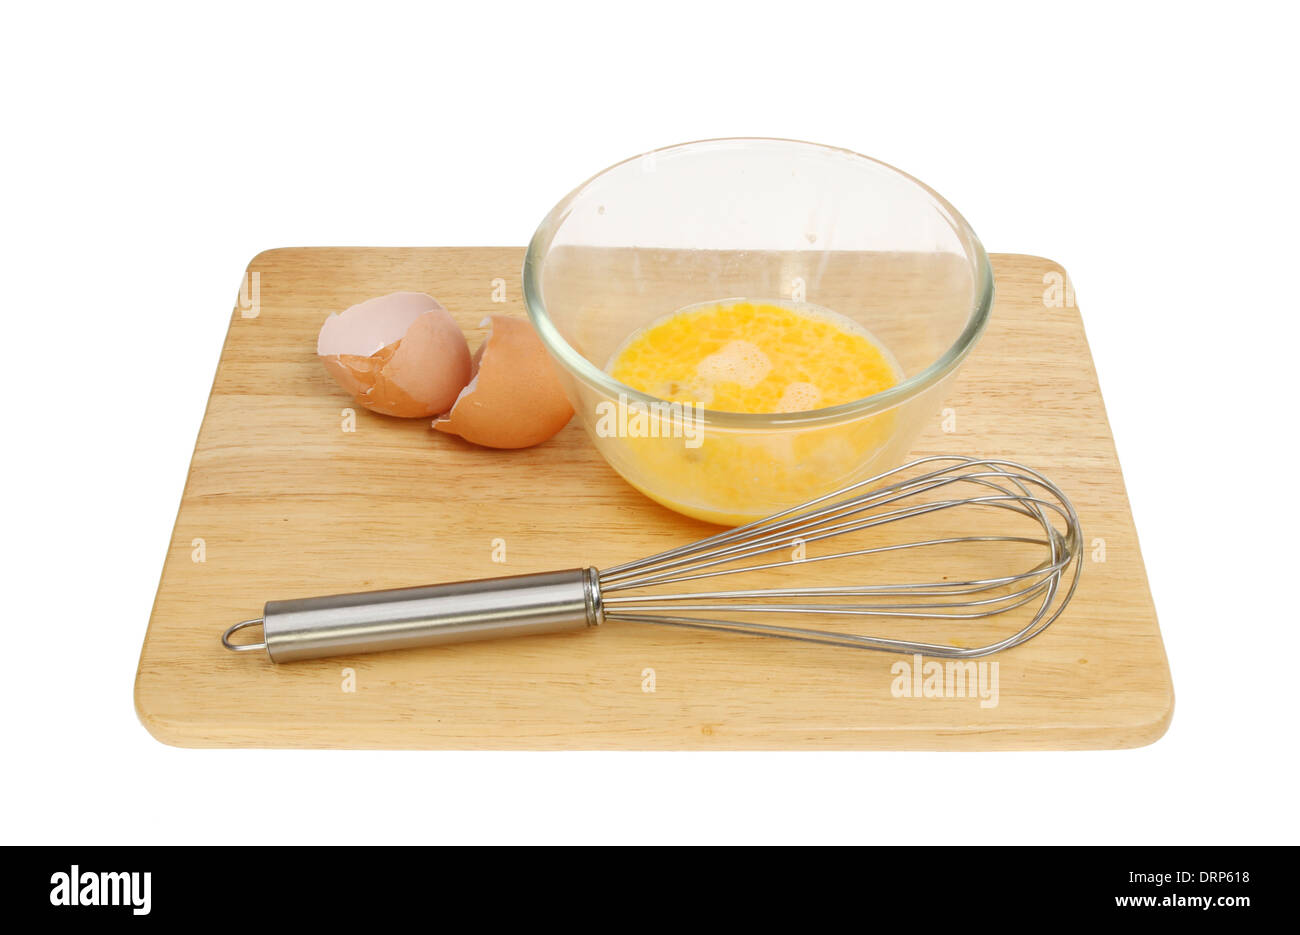 Egg in a glass mixing bowl with a whisk and egg shells on a wooden board isolated against white Stock Photo